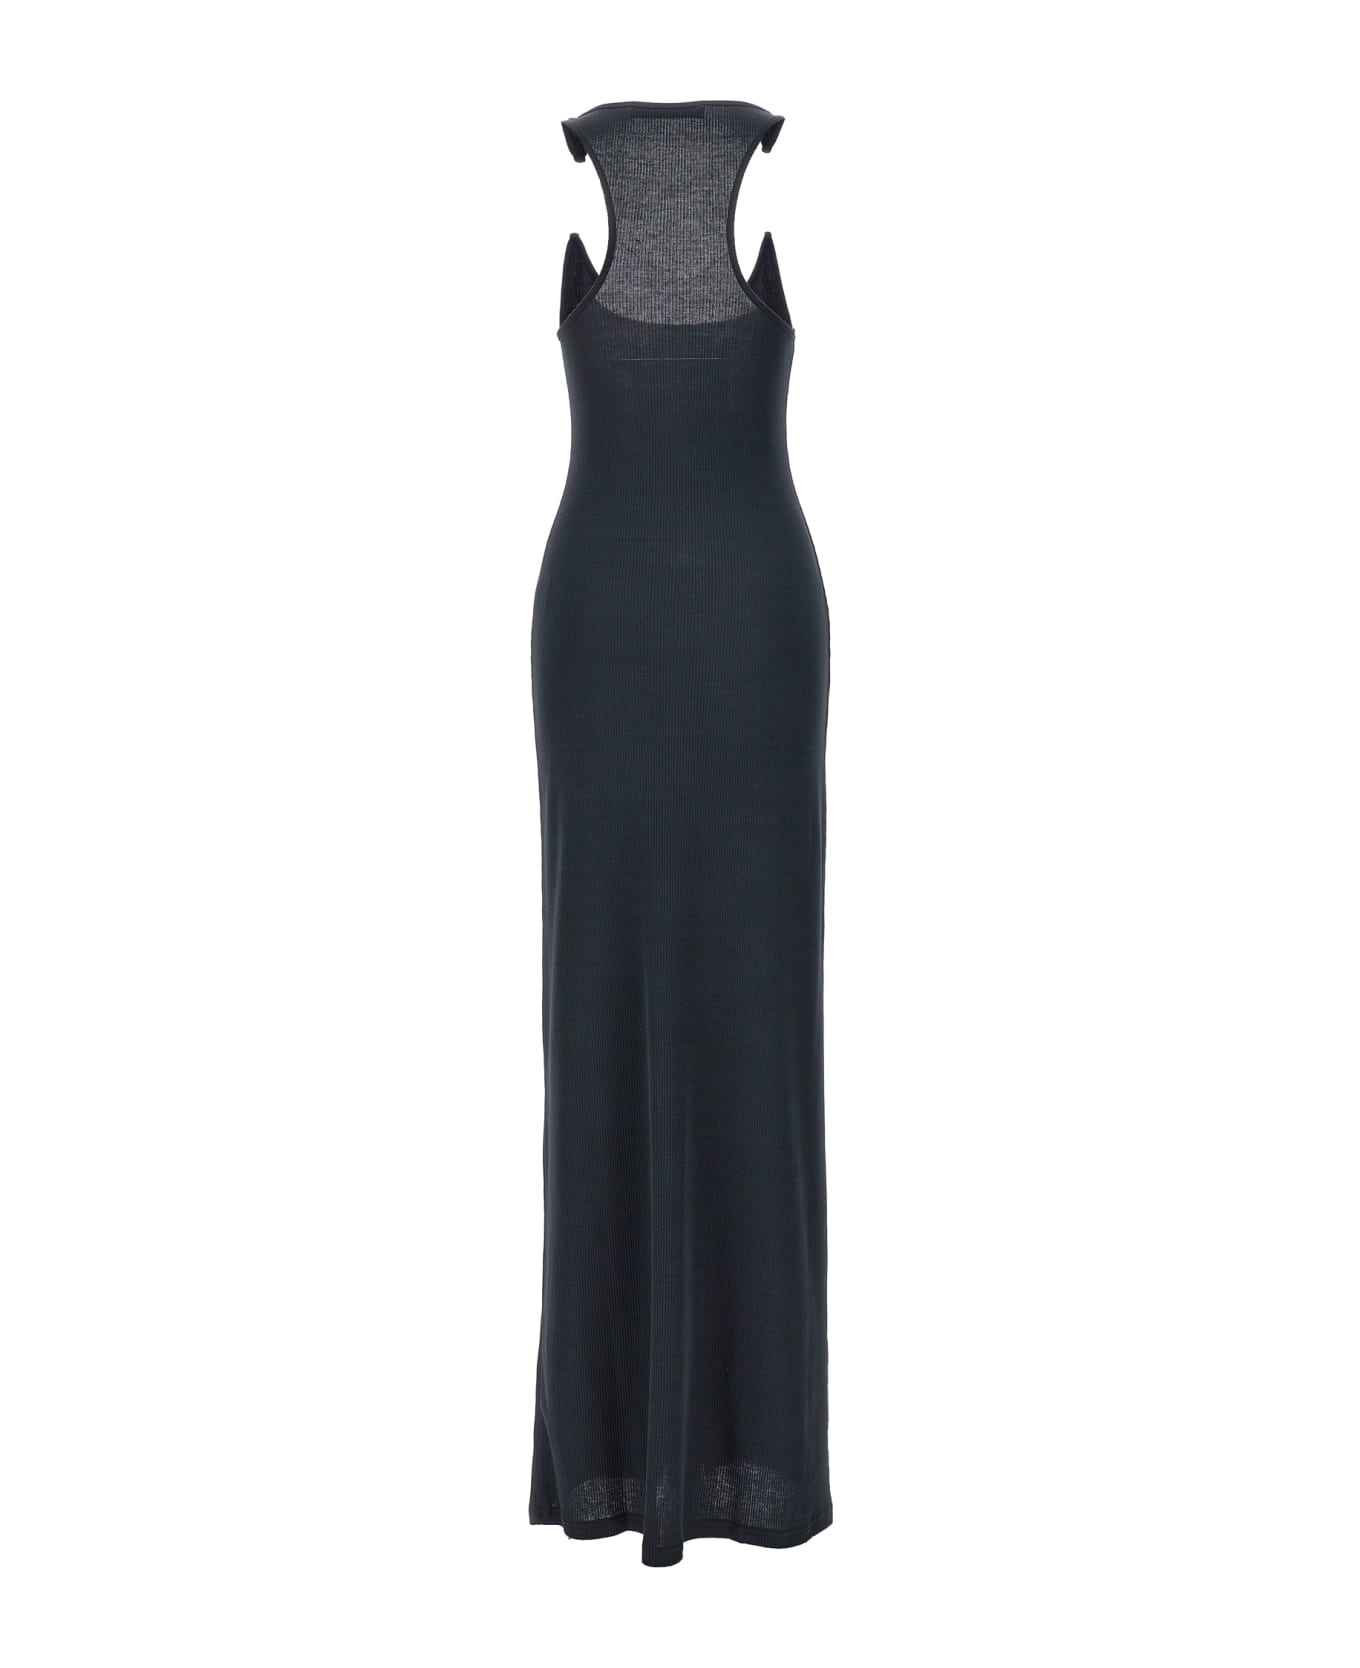 Y/Project 'invisible Strap' Dress - Black